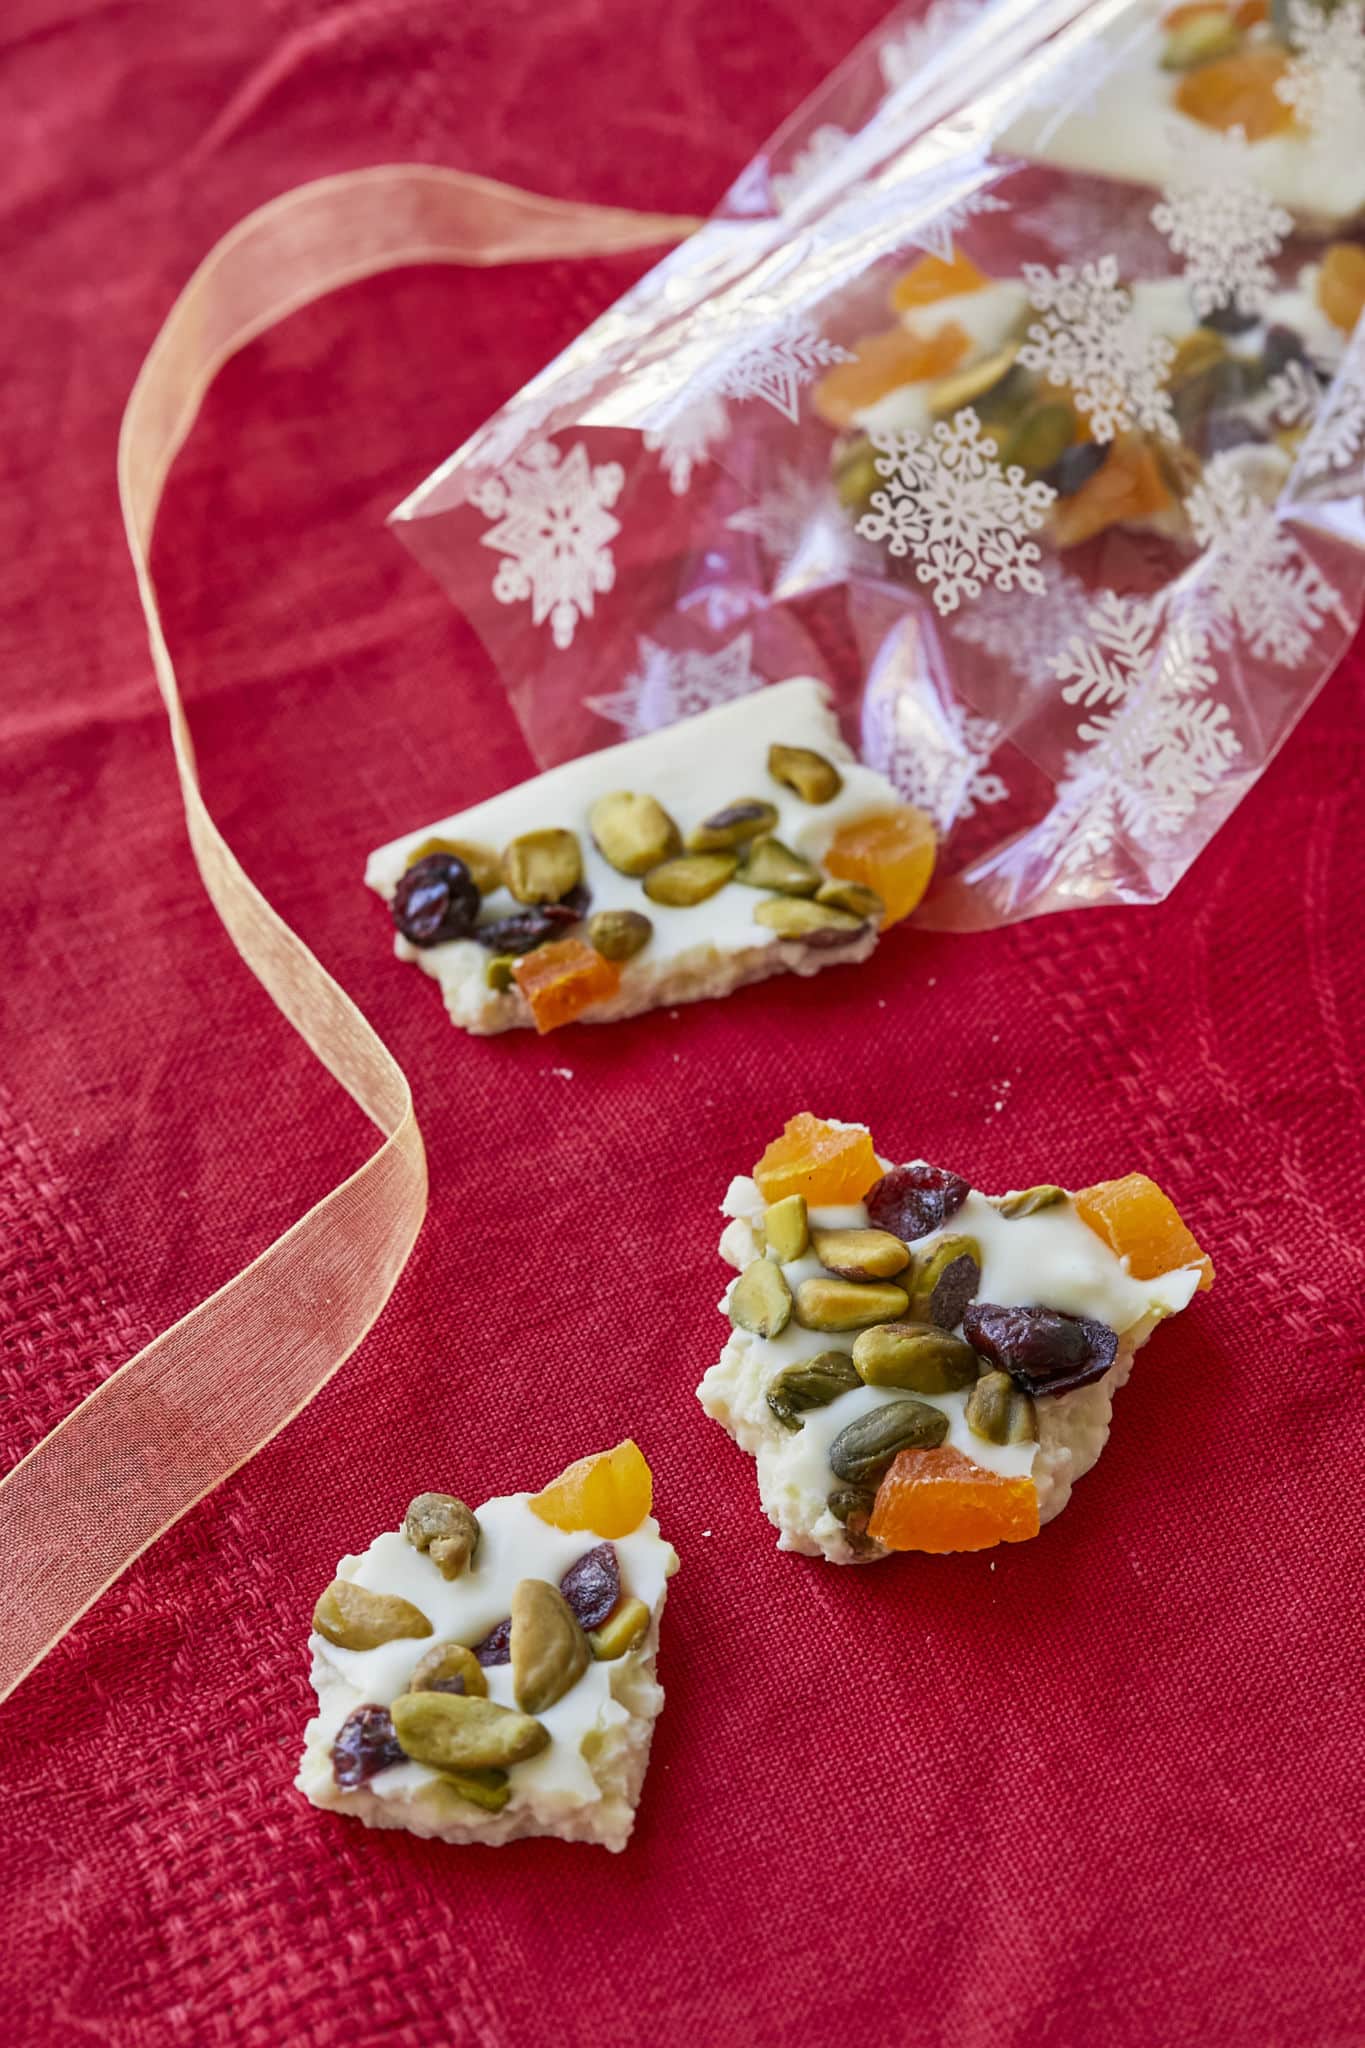 Pieces of white chocolate bark are spilled out of a clear gift bag with white snowflakes over a red table cloth.